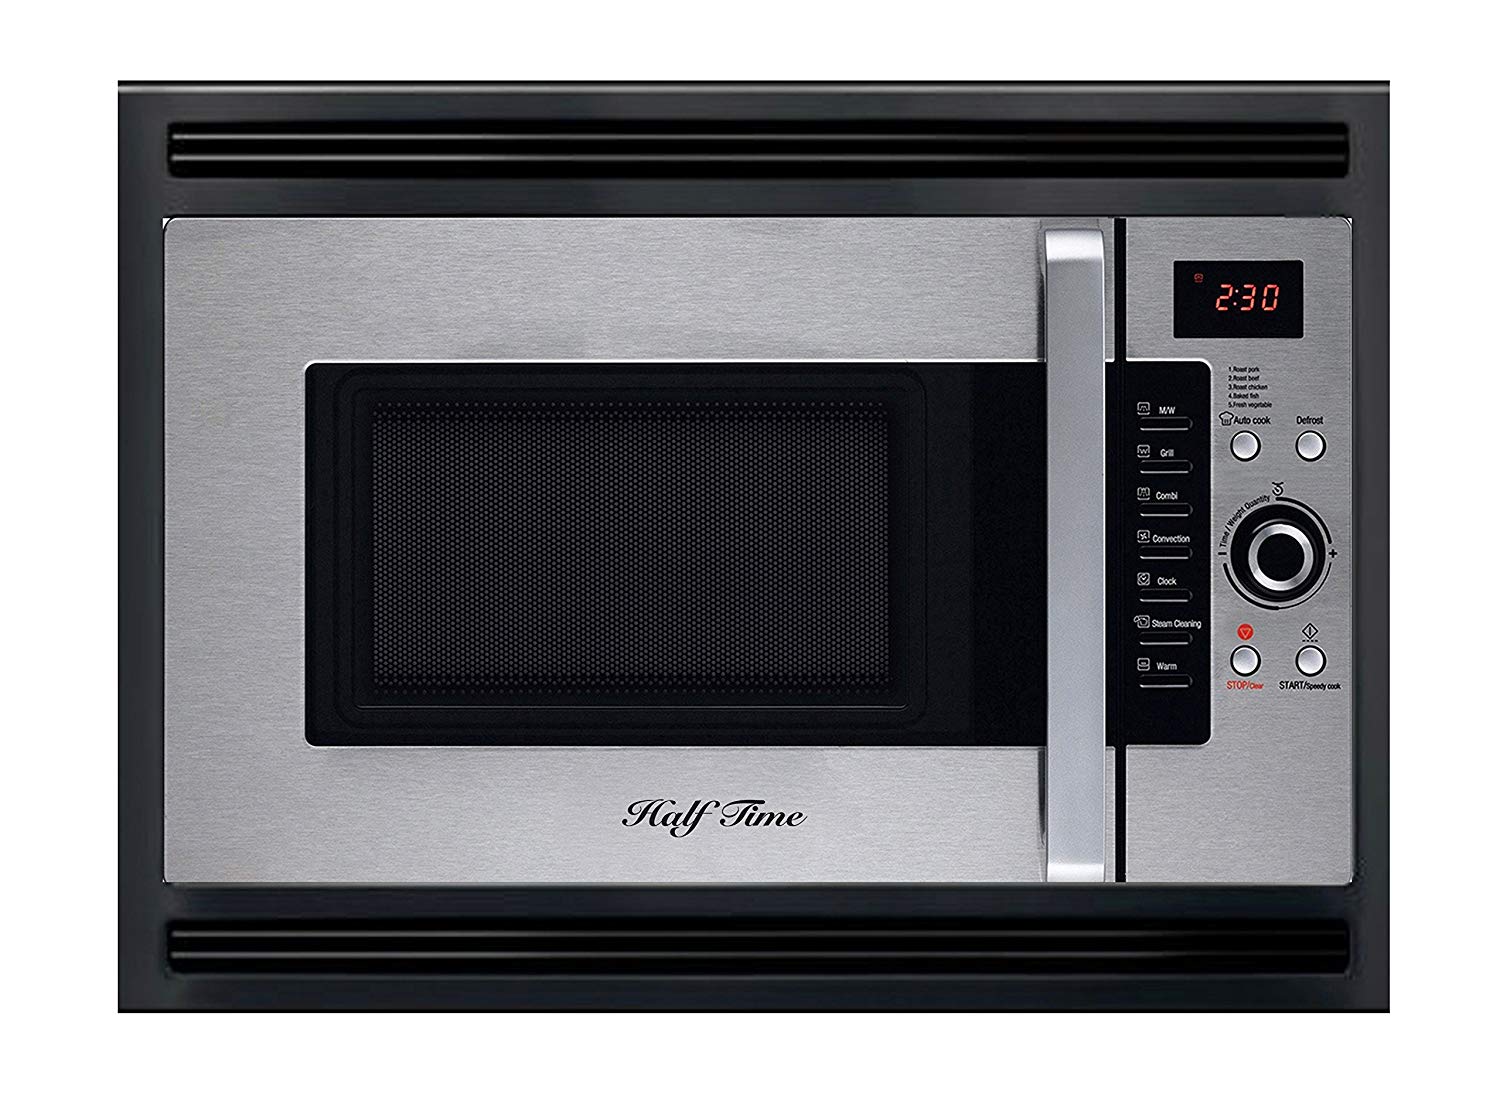 Master Chef 24" Half Time Built In Convection Microwave Oven for Home